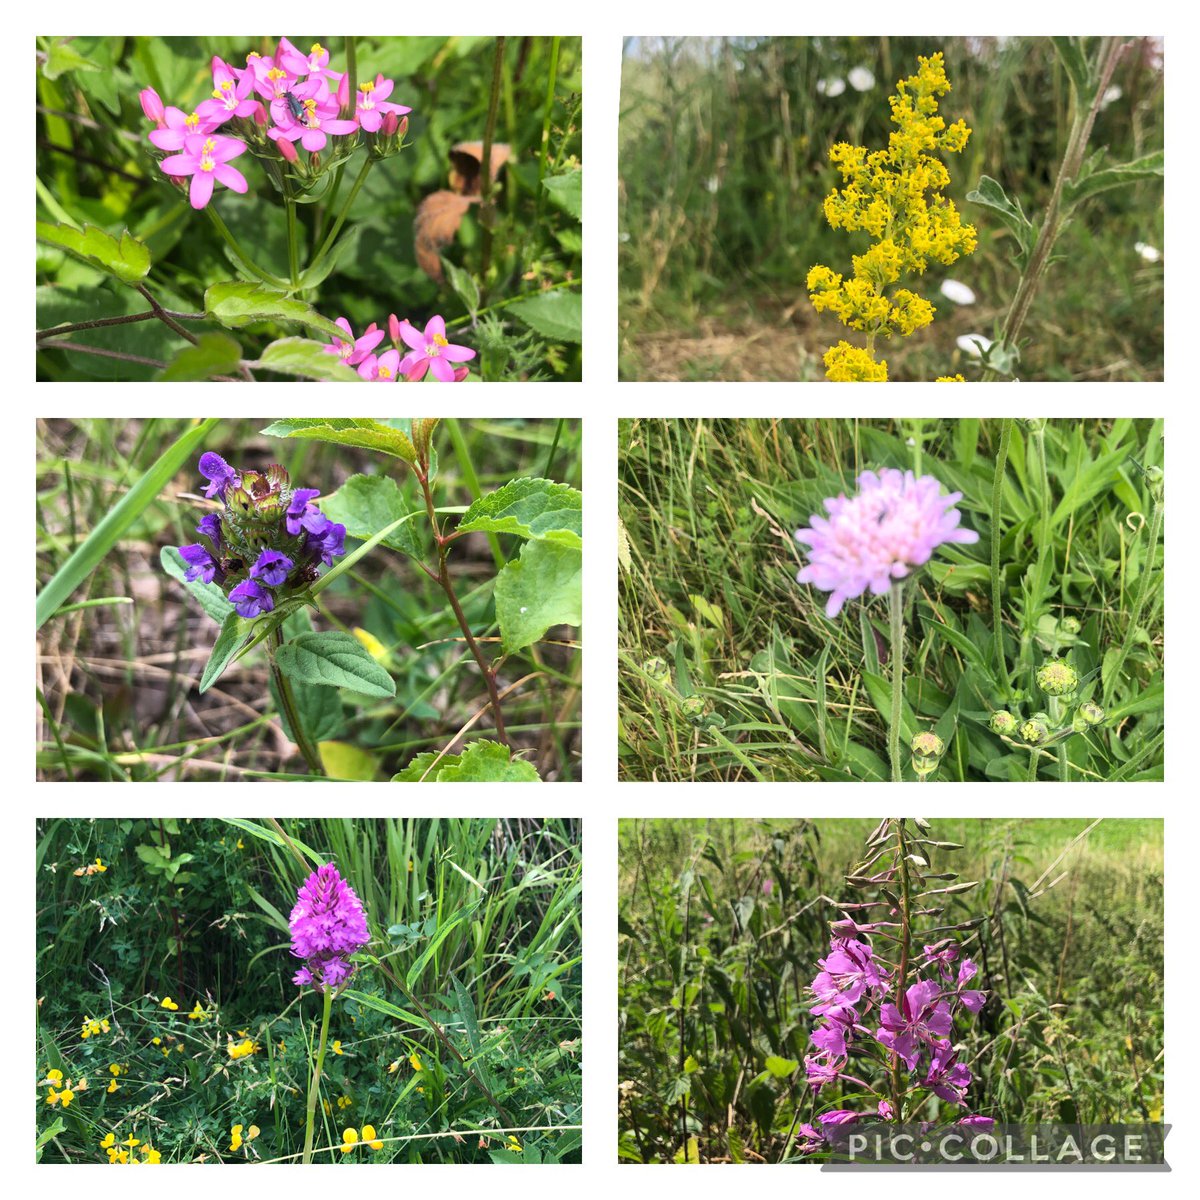 Exciting walk near Lavenham, stopping every few metres to look at a new #WildFlower. Spotted: Lady’s Bedstraw, White Bedstraw, Pyramidal Orchids, Common Selfheal, Common Centaury, Spiny Restharrow, Tufted Vetch, Field Scabious, Nipplewort, Fireweed, Creeping Cinquefoil and more!